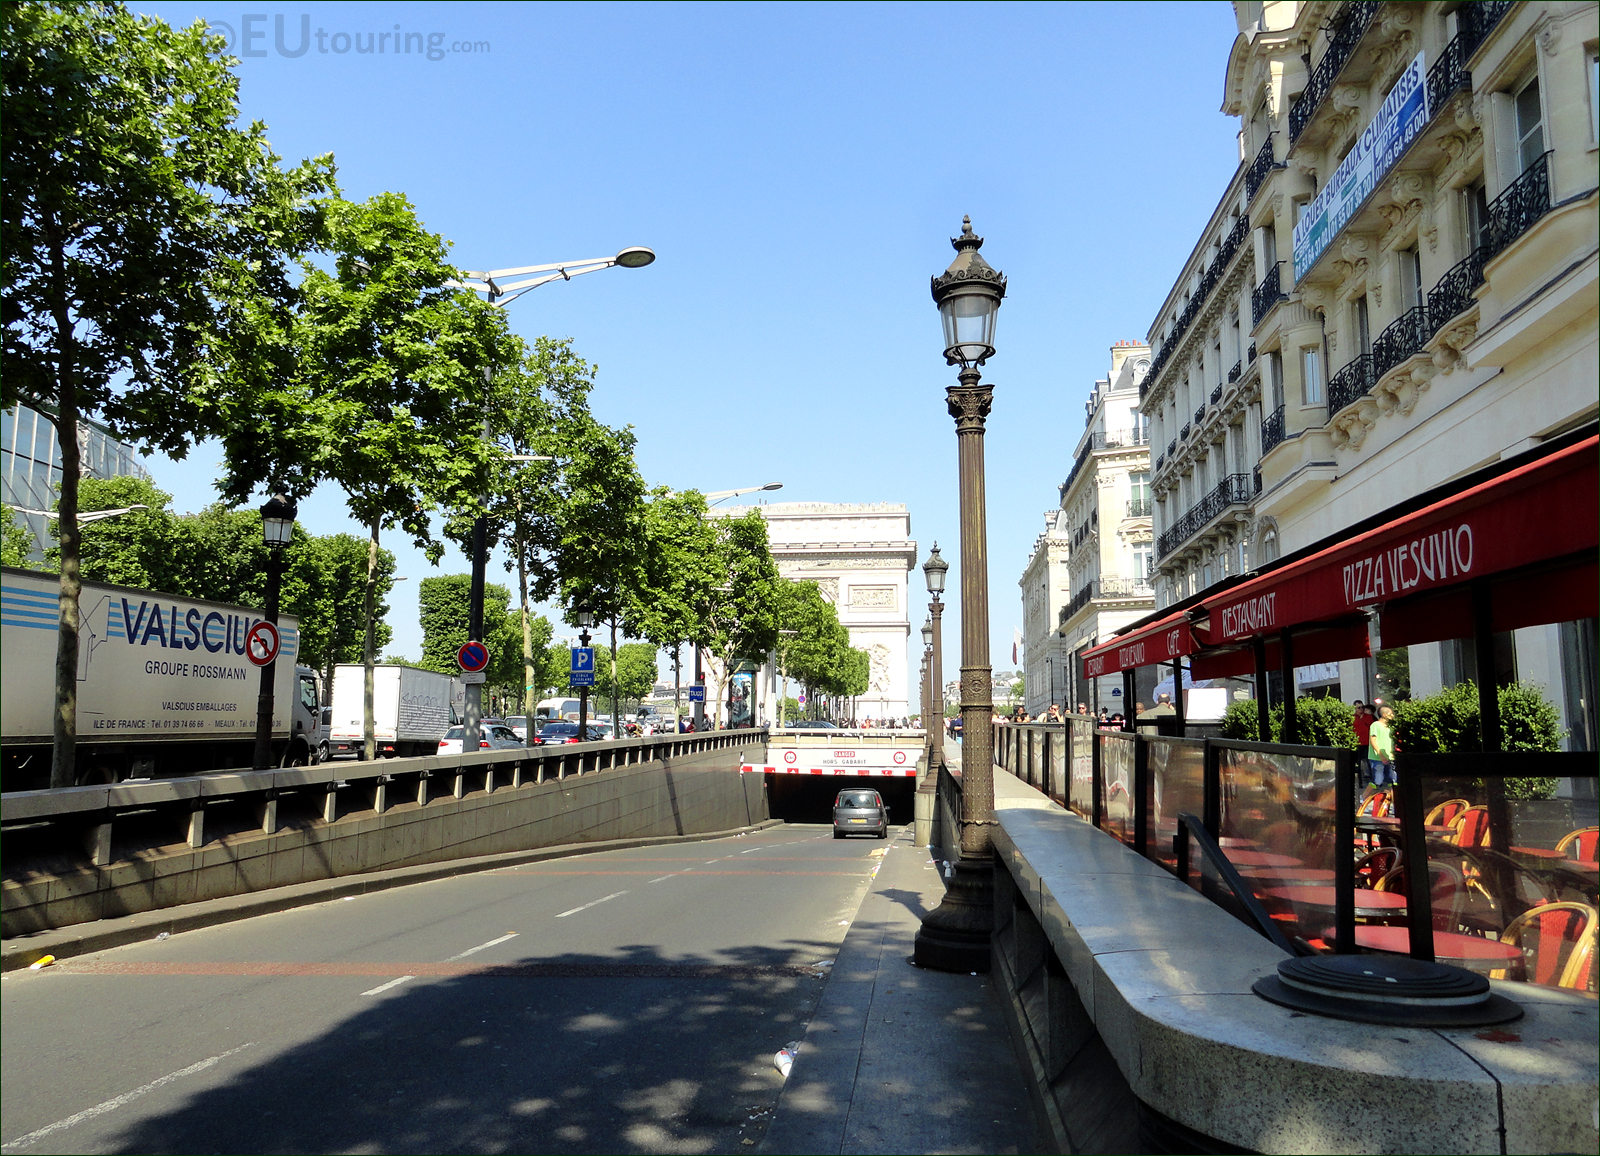 Street View Of Champs-Elysees Avenue With Building LOUIS VUITTON In Paris,  France Stock Photo, Picture and Royalty Free Image. Image 134445299.